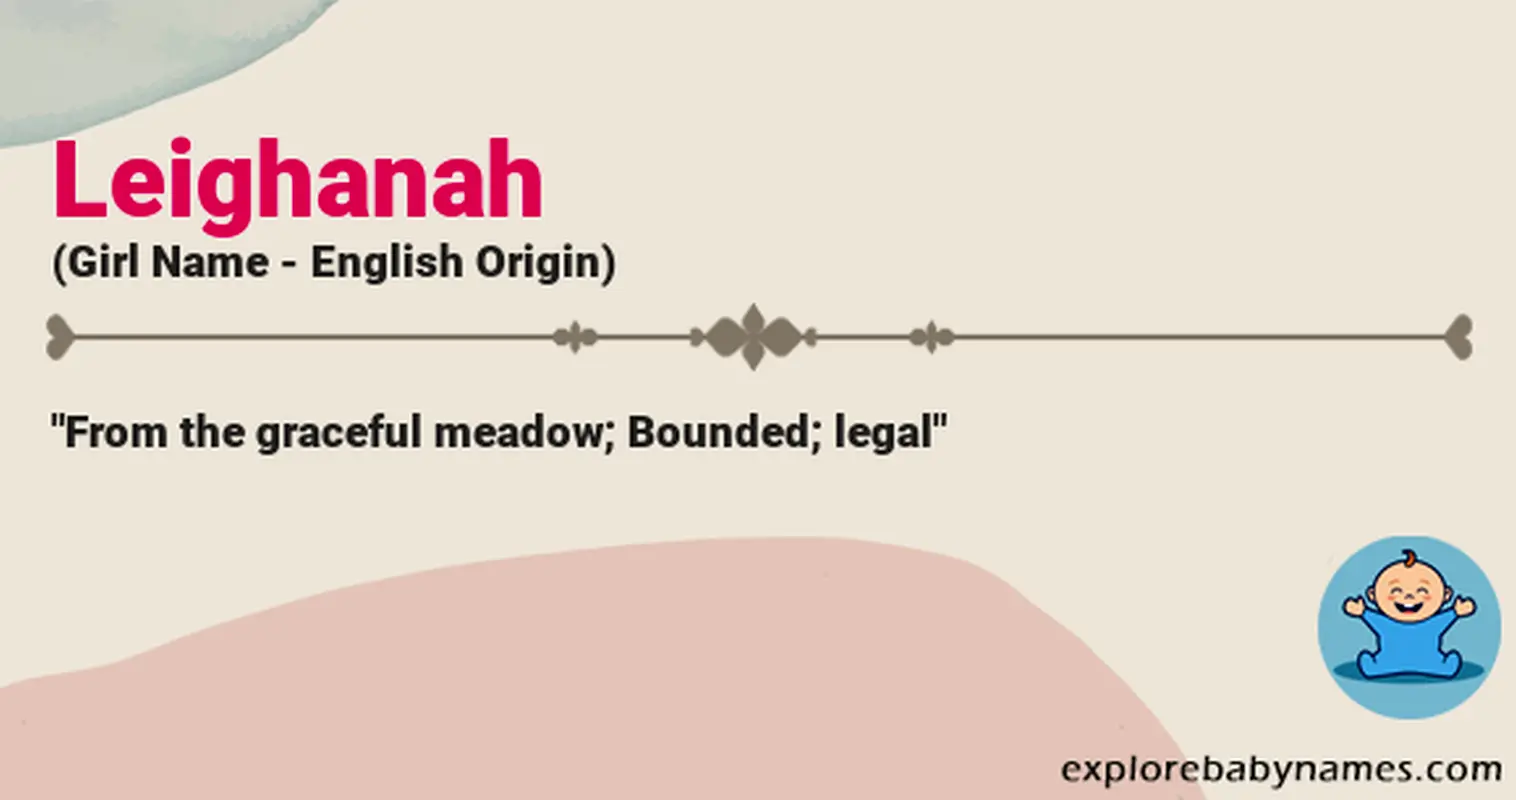 Meaning of Leighanah